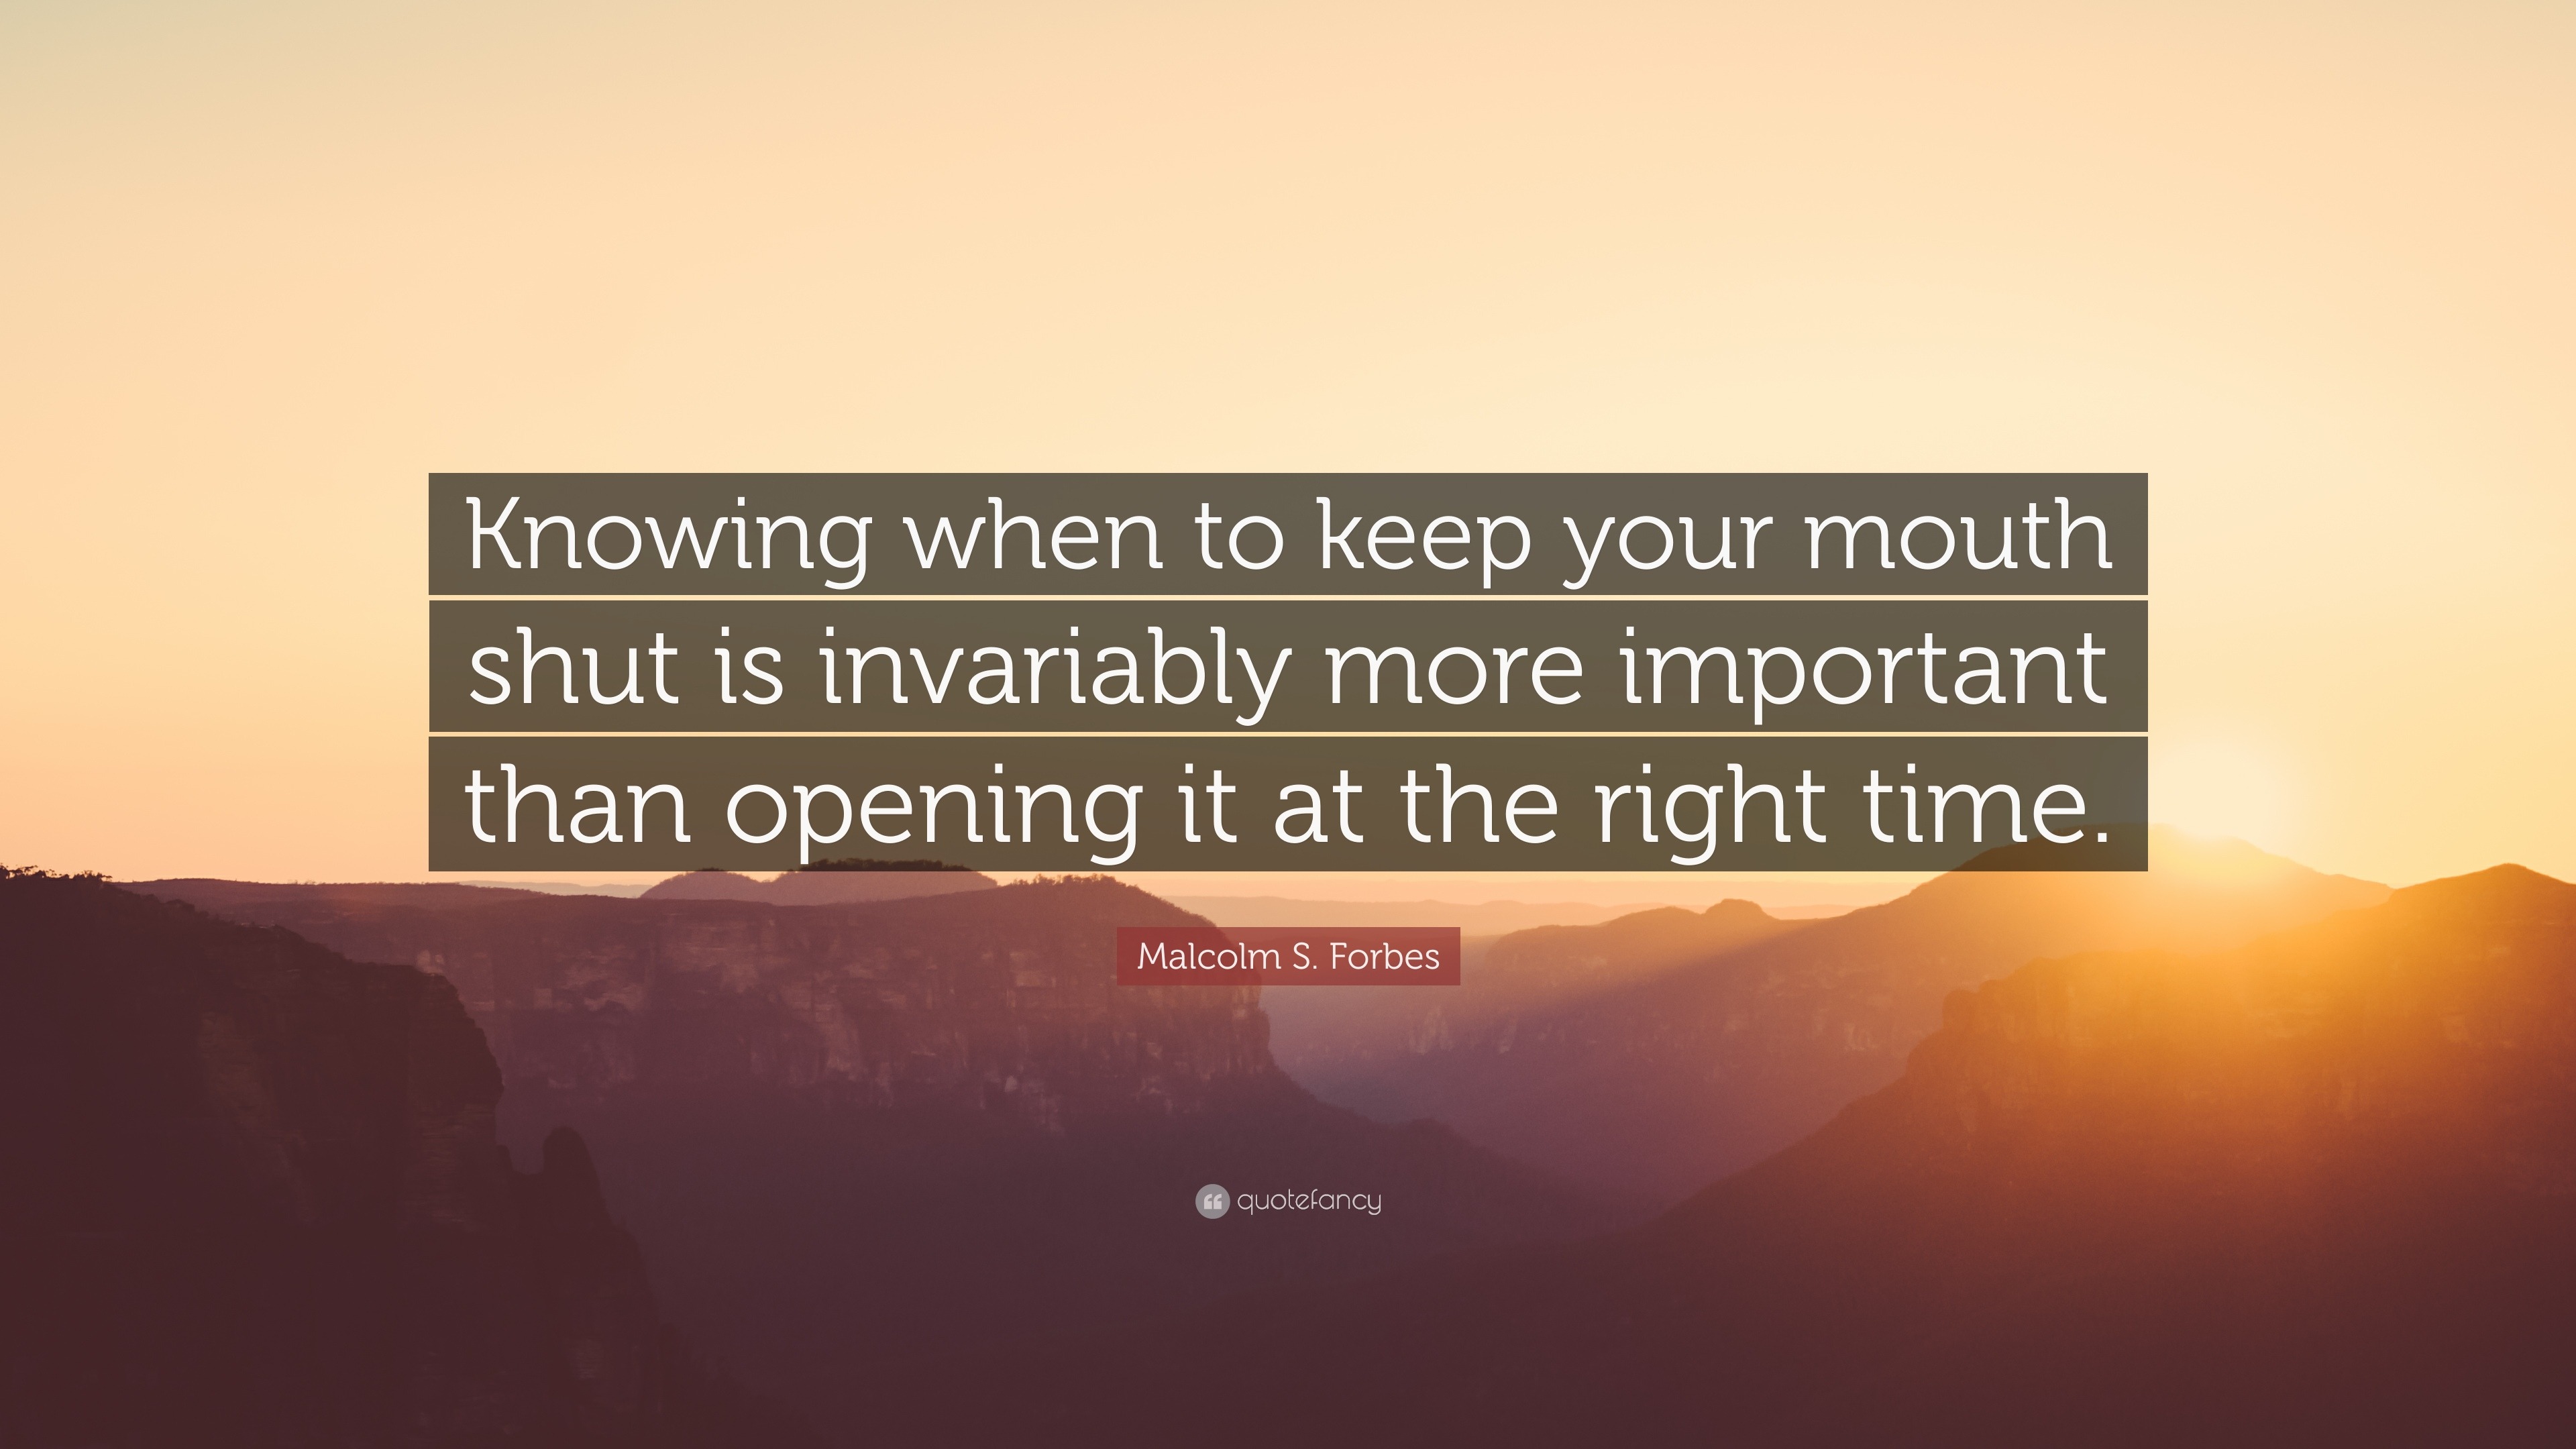 When to Keep Your Mouth Shut by Benjamin Kennet